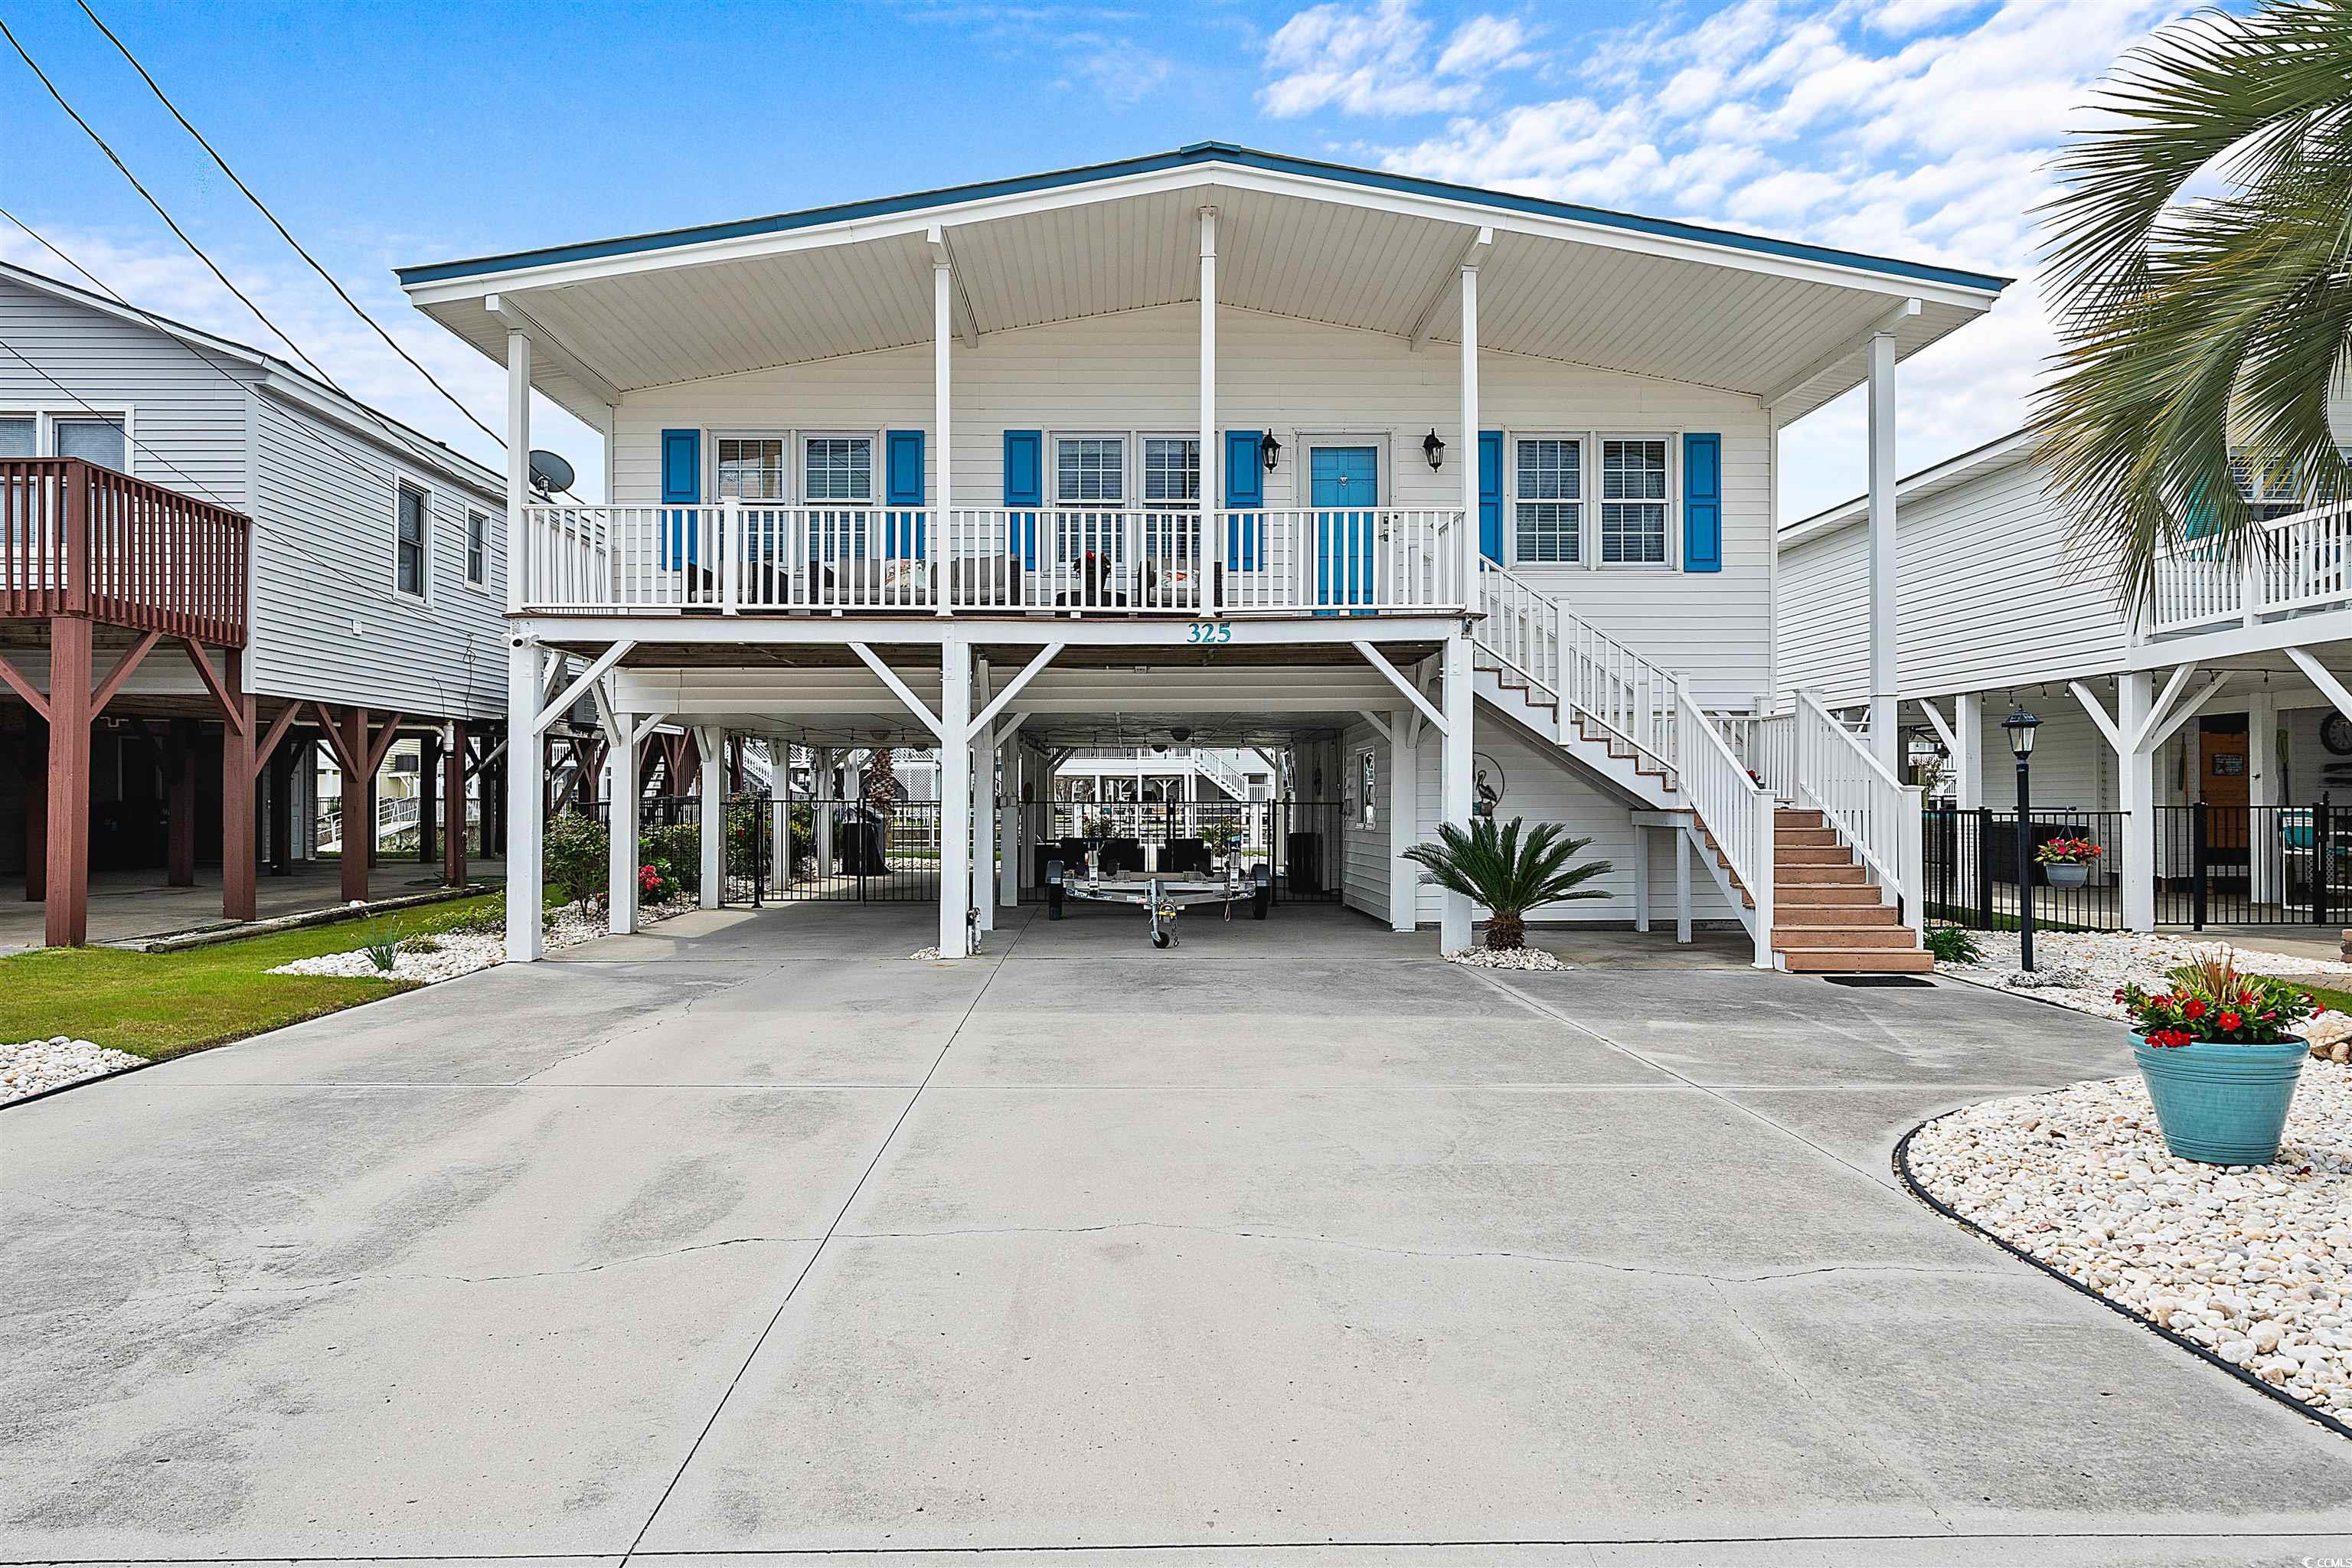 this is the beach house you have been looking for. located in the very desirable cherry grove area of north myrtle beach sc. this is a channel home raised beach house right on the inlet channel of 58th ave. n. it's a 4 br 2.5ba home with a beautiful manicured yard. the fully furnished home has been fully renovated from the moment you step on the front steps, the steps and  front porch area is made out of trex for it's beauty and its low maintenance and the roof is metal for a great  look and durability. when you walk thru the front door you are greeted by an open floor concept with a raised beam ceiling, oak laminate hardwood floors throughout the home with the exception of the bathrooms and utility rooms downstairs. the kitchen features granite counter tops, tiled back splash, custom cabinets with a breakfast bar/island right in the middle. the kitchen features a side by side refrigerator, smooth top stove and oven, microwave and dish washer. there are 4 large bedrooms and 2 baths, one with a shower and 1 with a tub/shower combo. the highlight of the home is the back porch/deck area that overlooks the channel and the backyard. the backyard features a manicured turf area, a sea wall and a jet ski dock. the jet skis do not convey but, can be negoiated.  the downstairs under the home is a perfect place for entertaining on those cool spring and hot summer evenings. it features outdoor furniture, a tv, a 12x15 storage area for all your beach gear, a kitchen area with a sink and a microwave and a half bath. this beach home has it all and is waiting on the new owners to love it as much as the current owners have. come check it out.